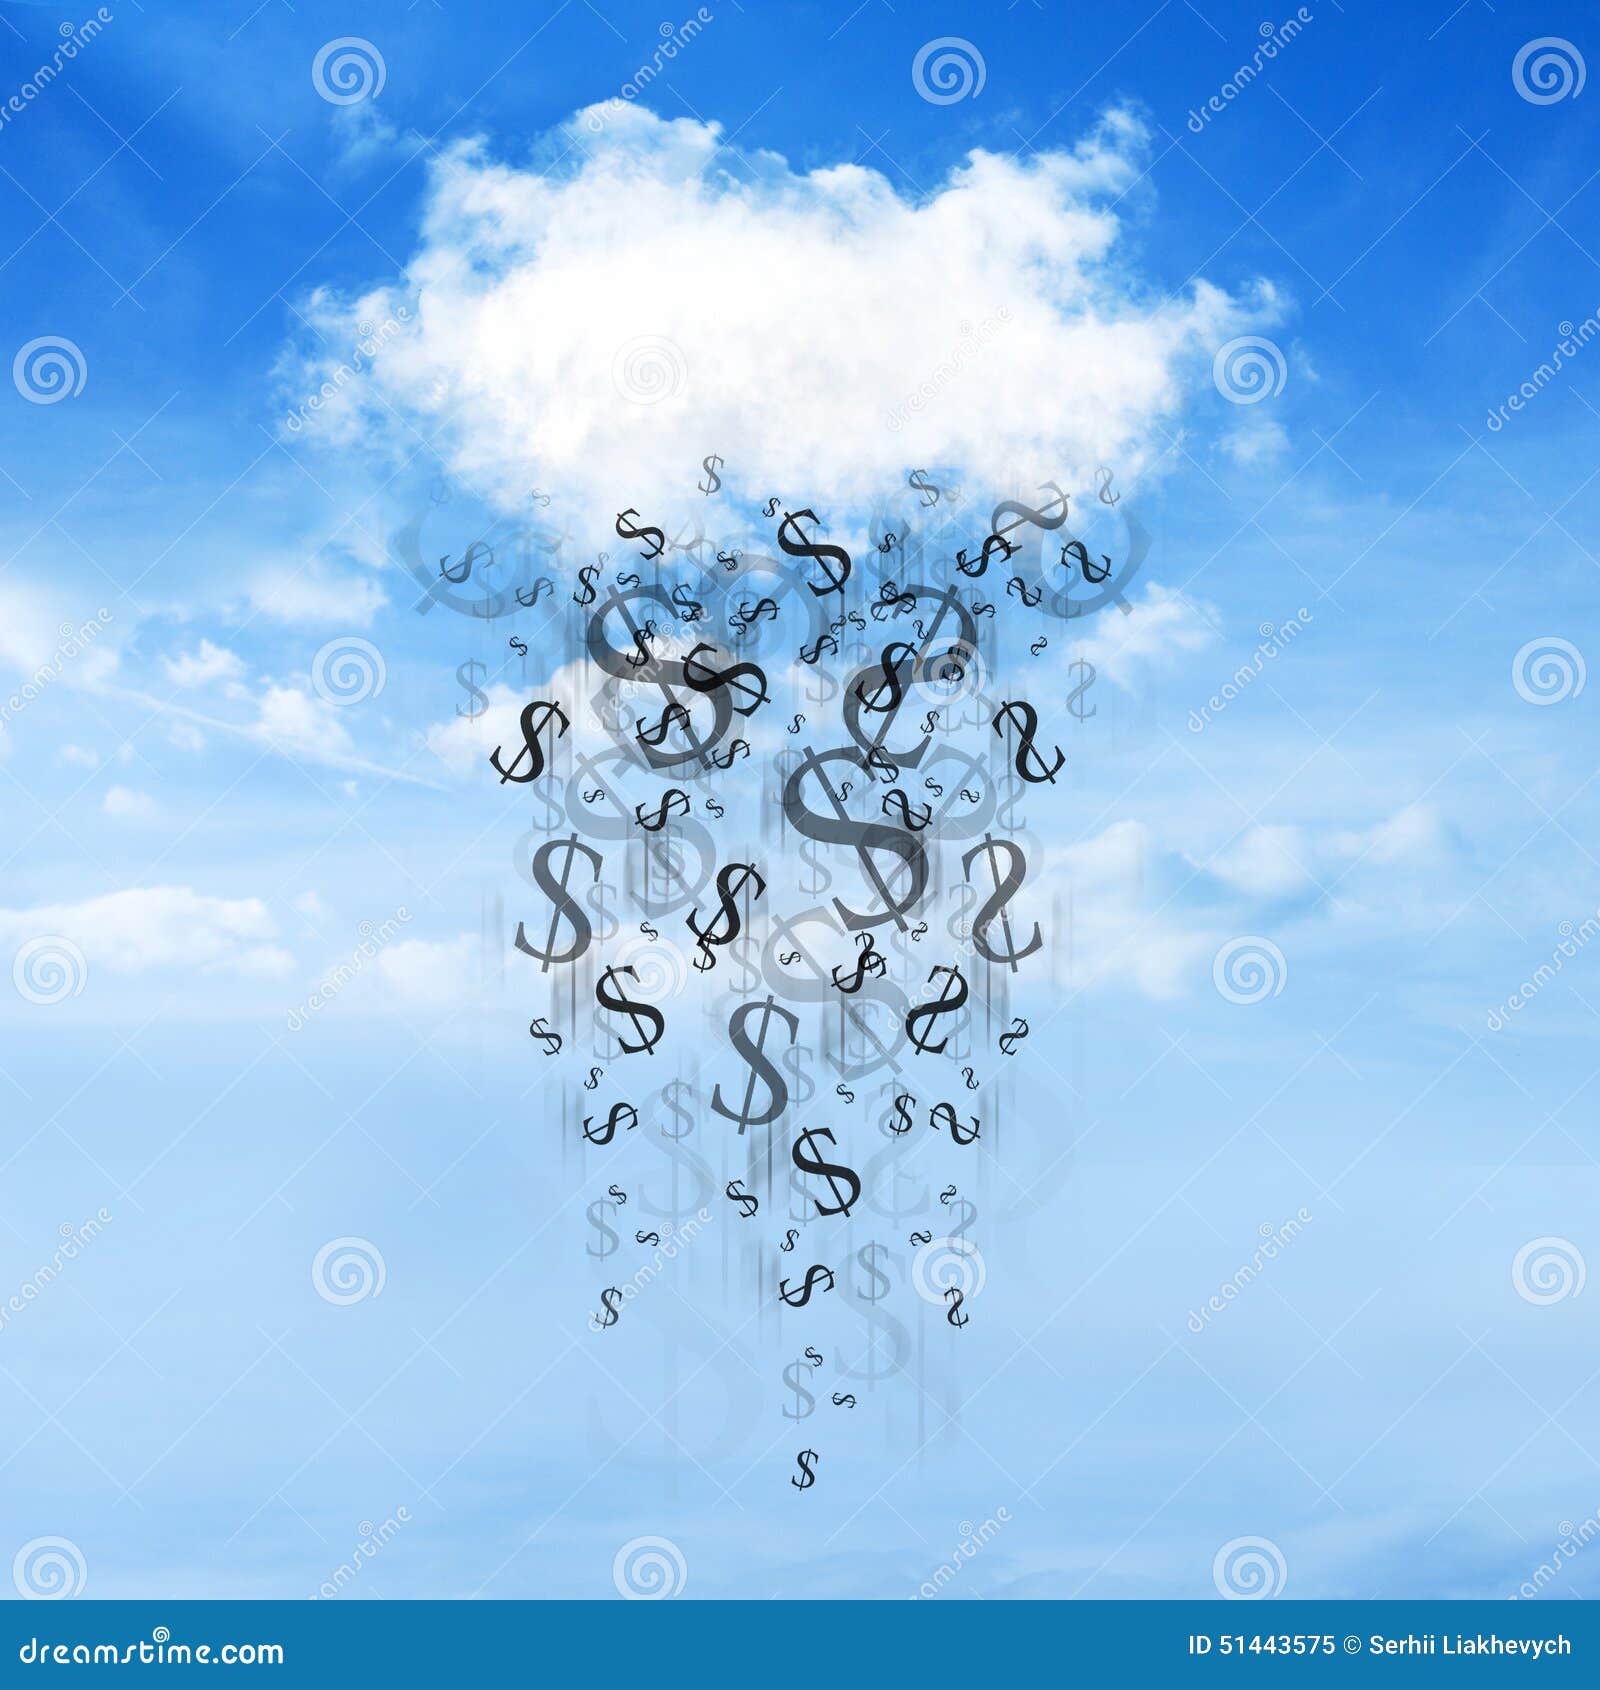 Cloud and money rain stock image. Image of color, interest - 51443575